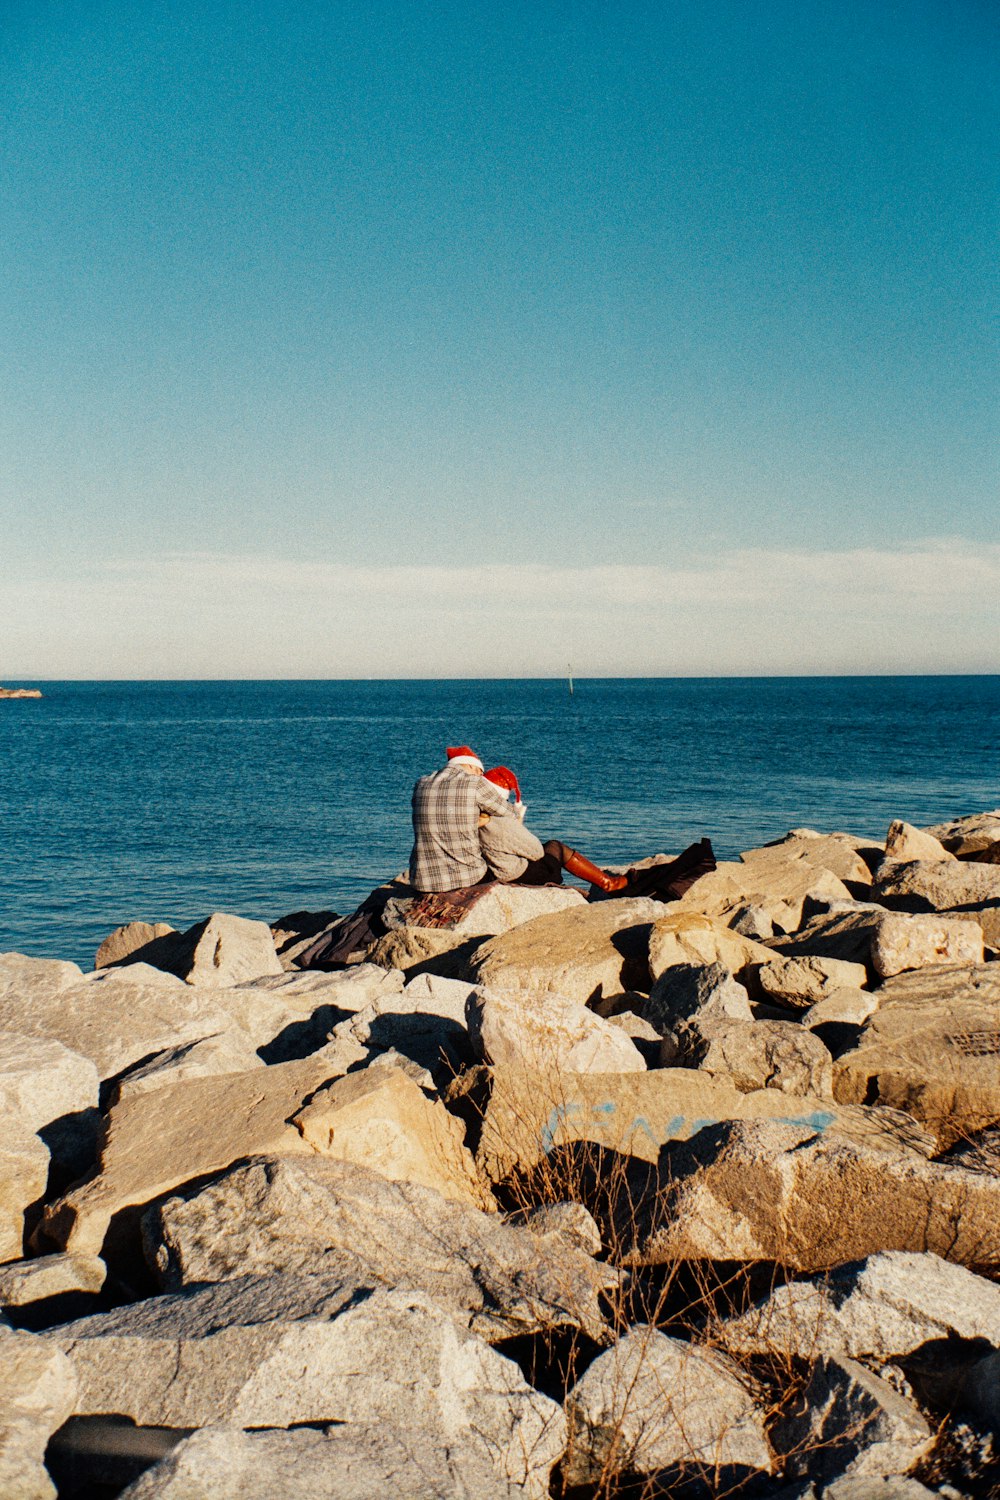 person in white and red shirt sitting on gray rock near body of water during daytime